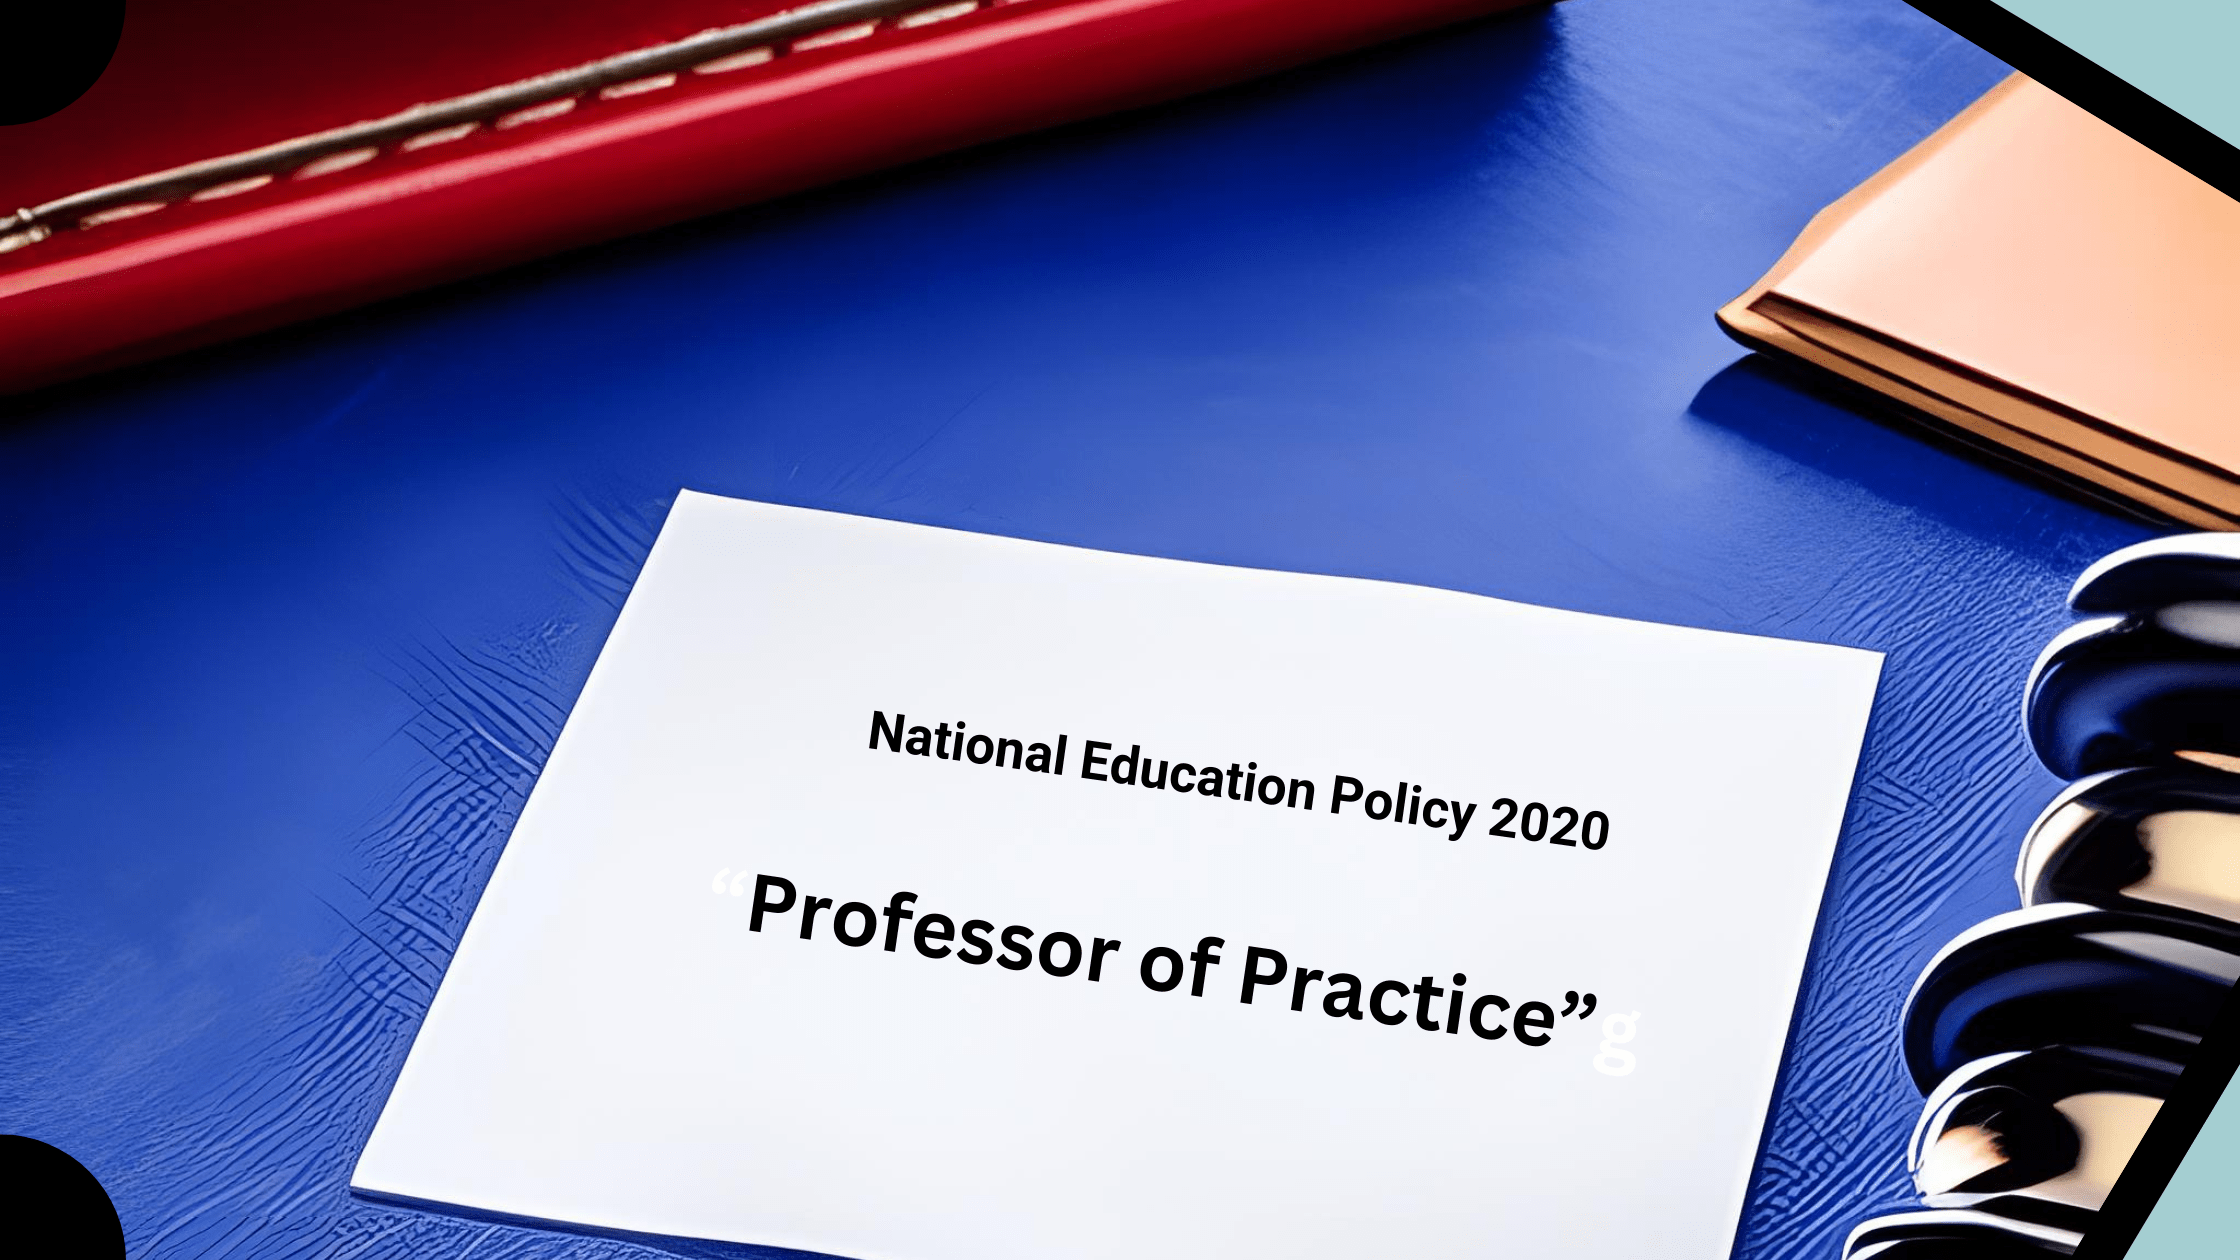 Unleashing the Power of "Professors of Practice" in National Education Policy 2020